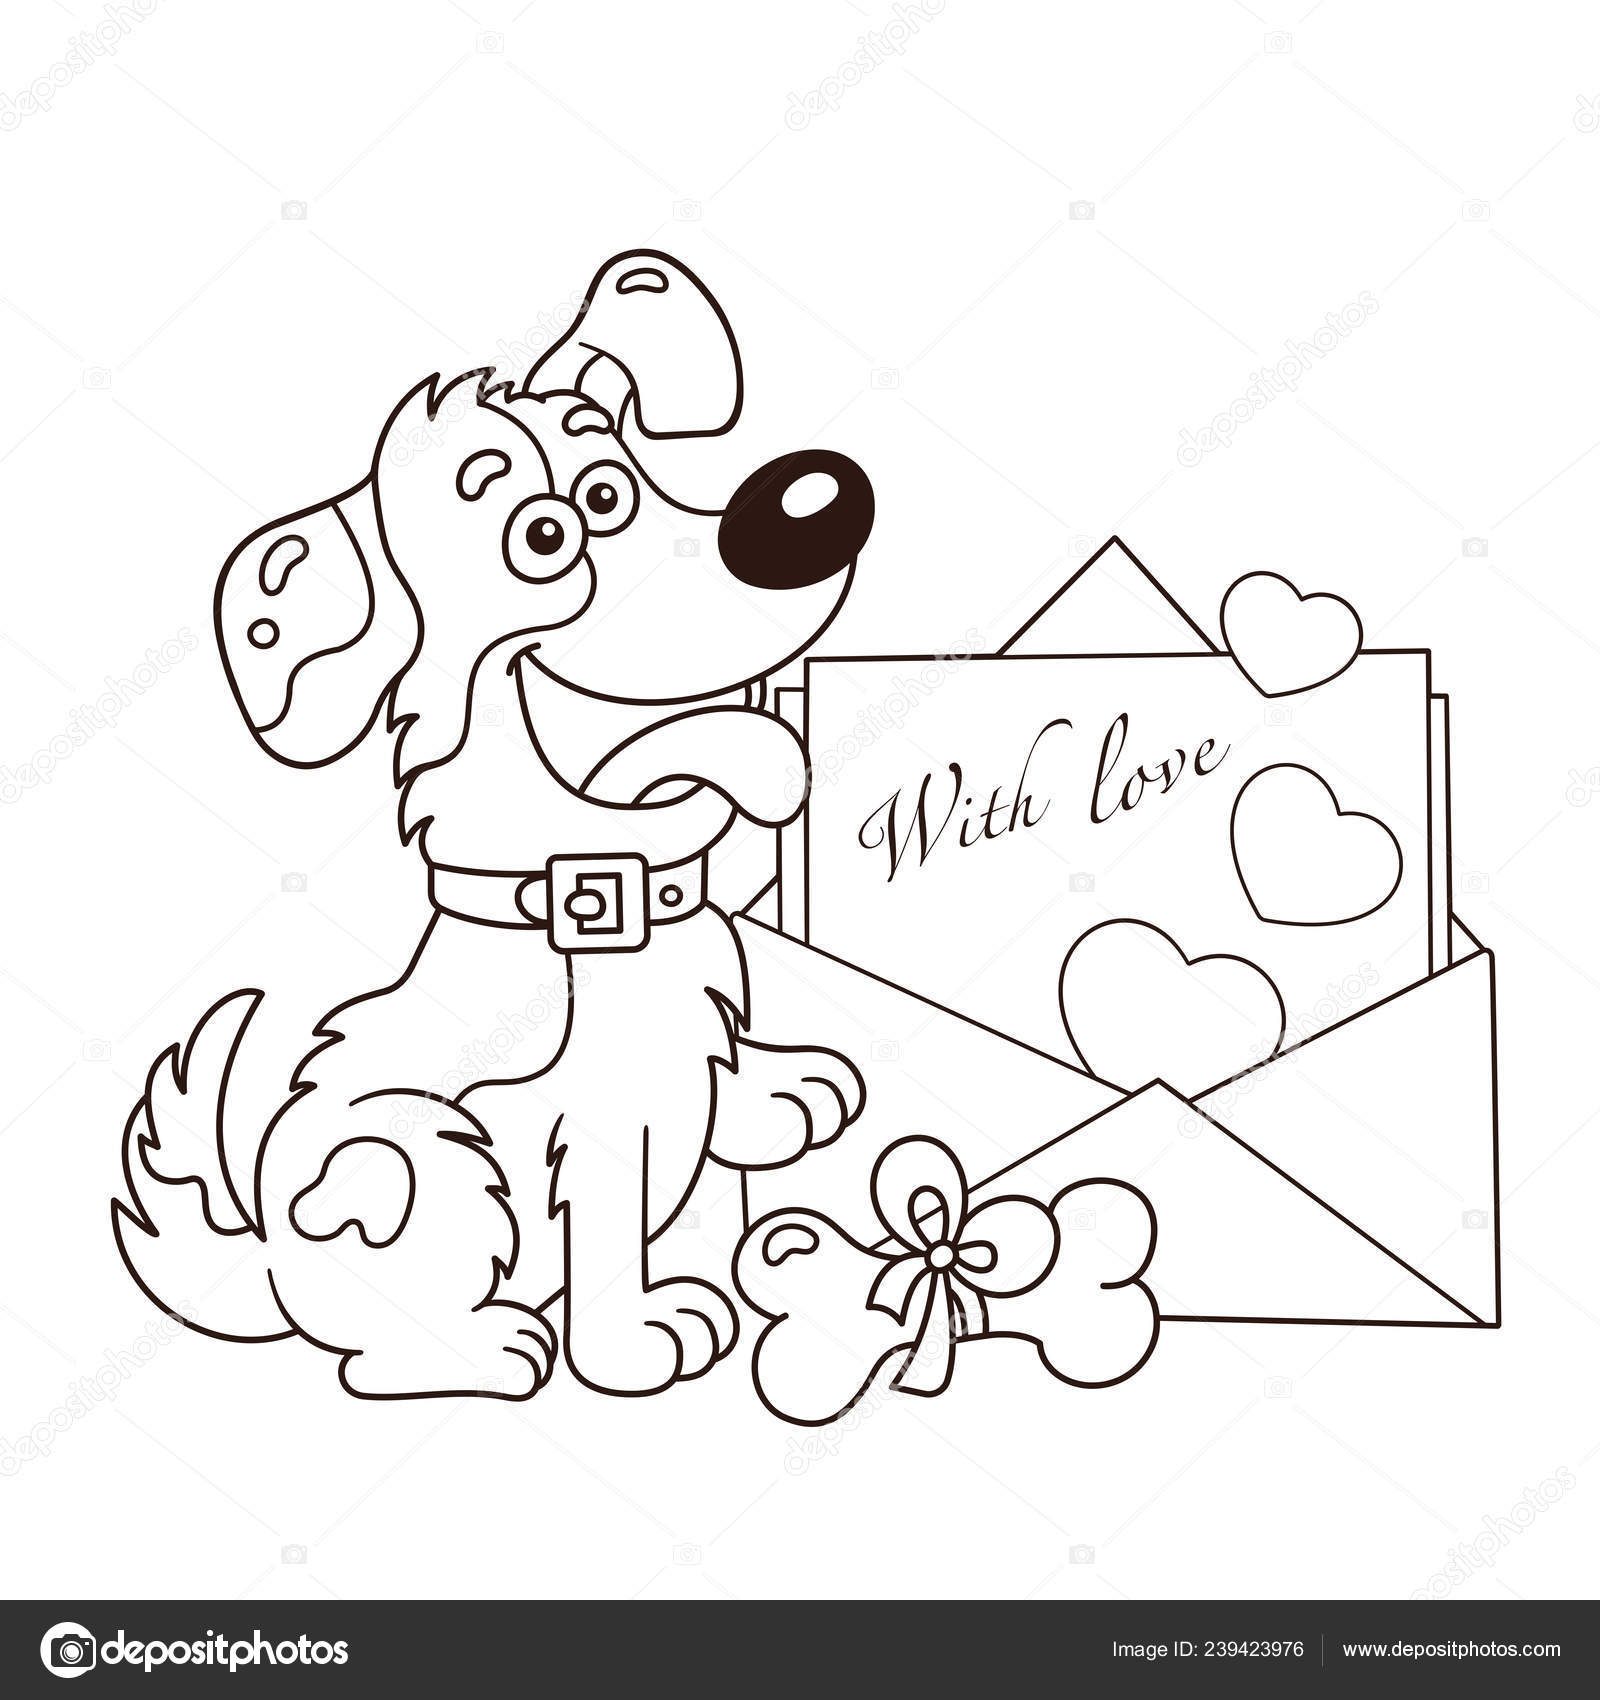 Coloring page outline cartoon dog letter greeting card birthday valentines stock vector by oleon